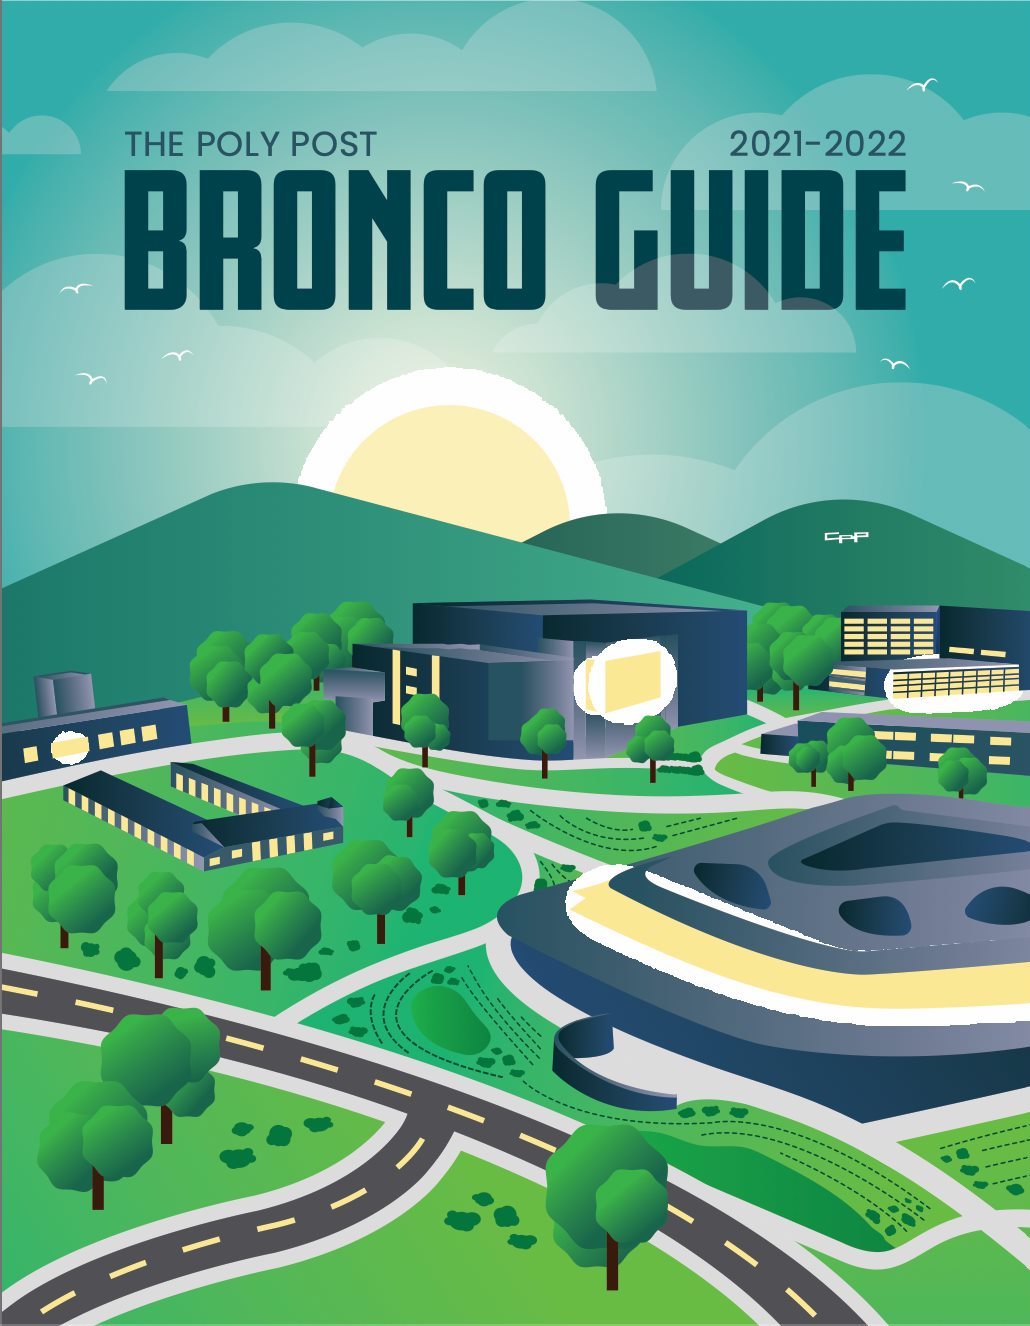 The Poly Post.  Cal Poly Pomona's Student Newspaper.  The Poly Post 2021-2022 Bronco Guide